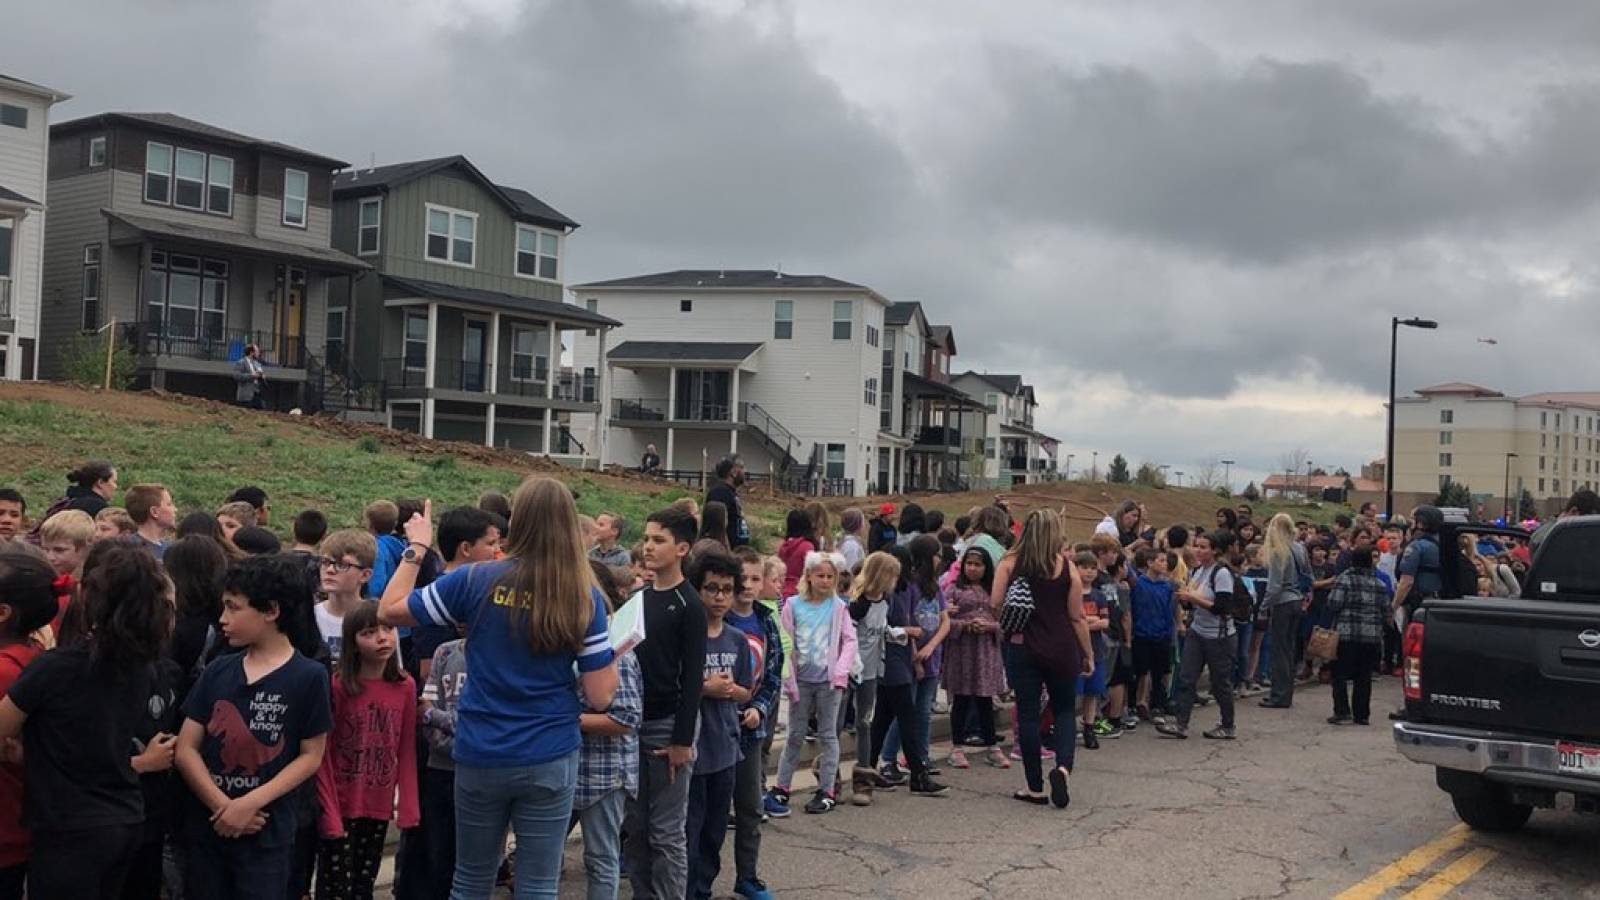 People wait outside near the STEM School during a shooting incident in Highlands Ranch, Colorado, U.S. in this May 7, 2019 image obtained via social media